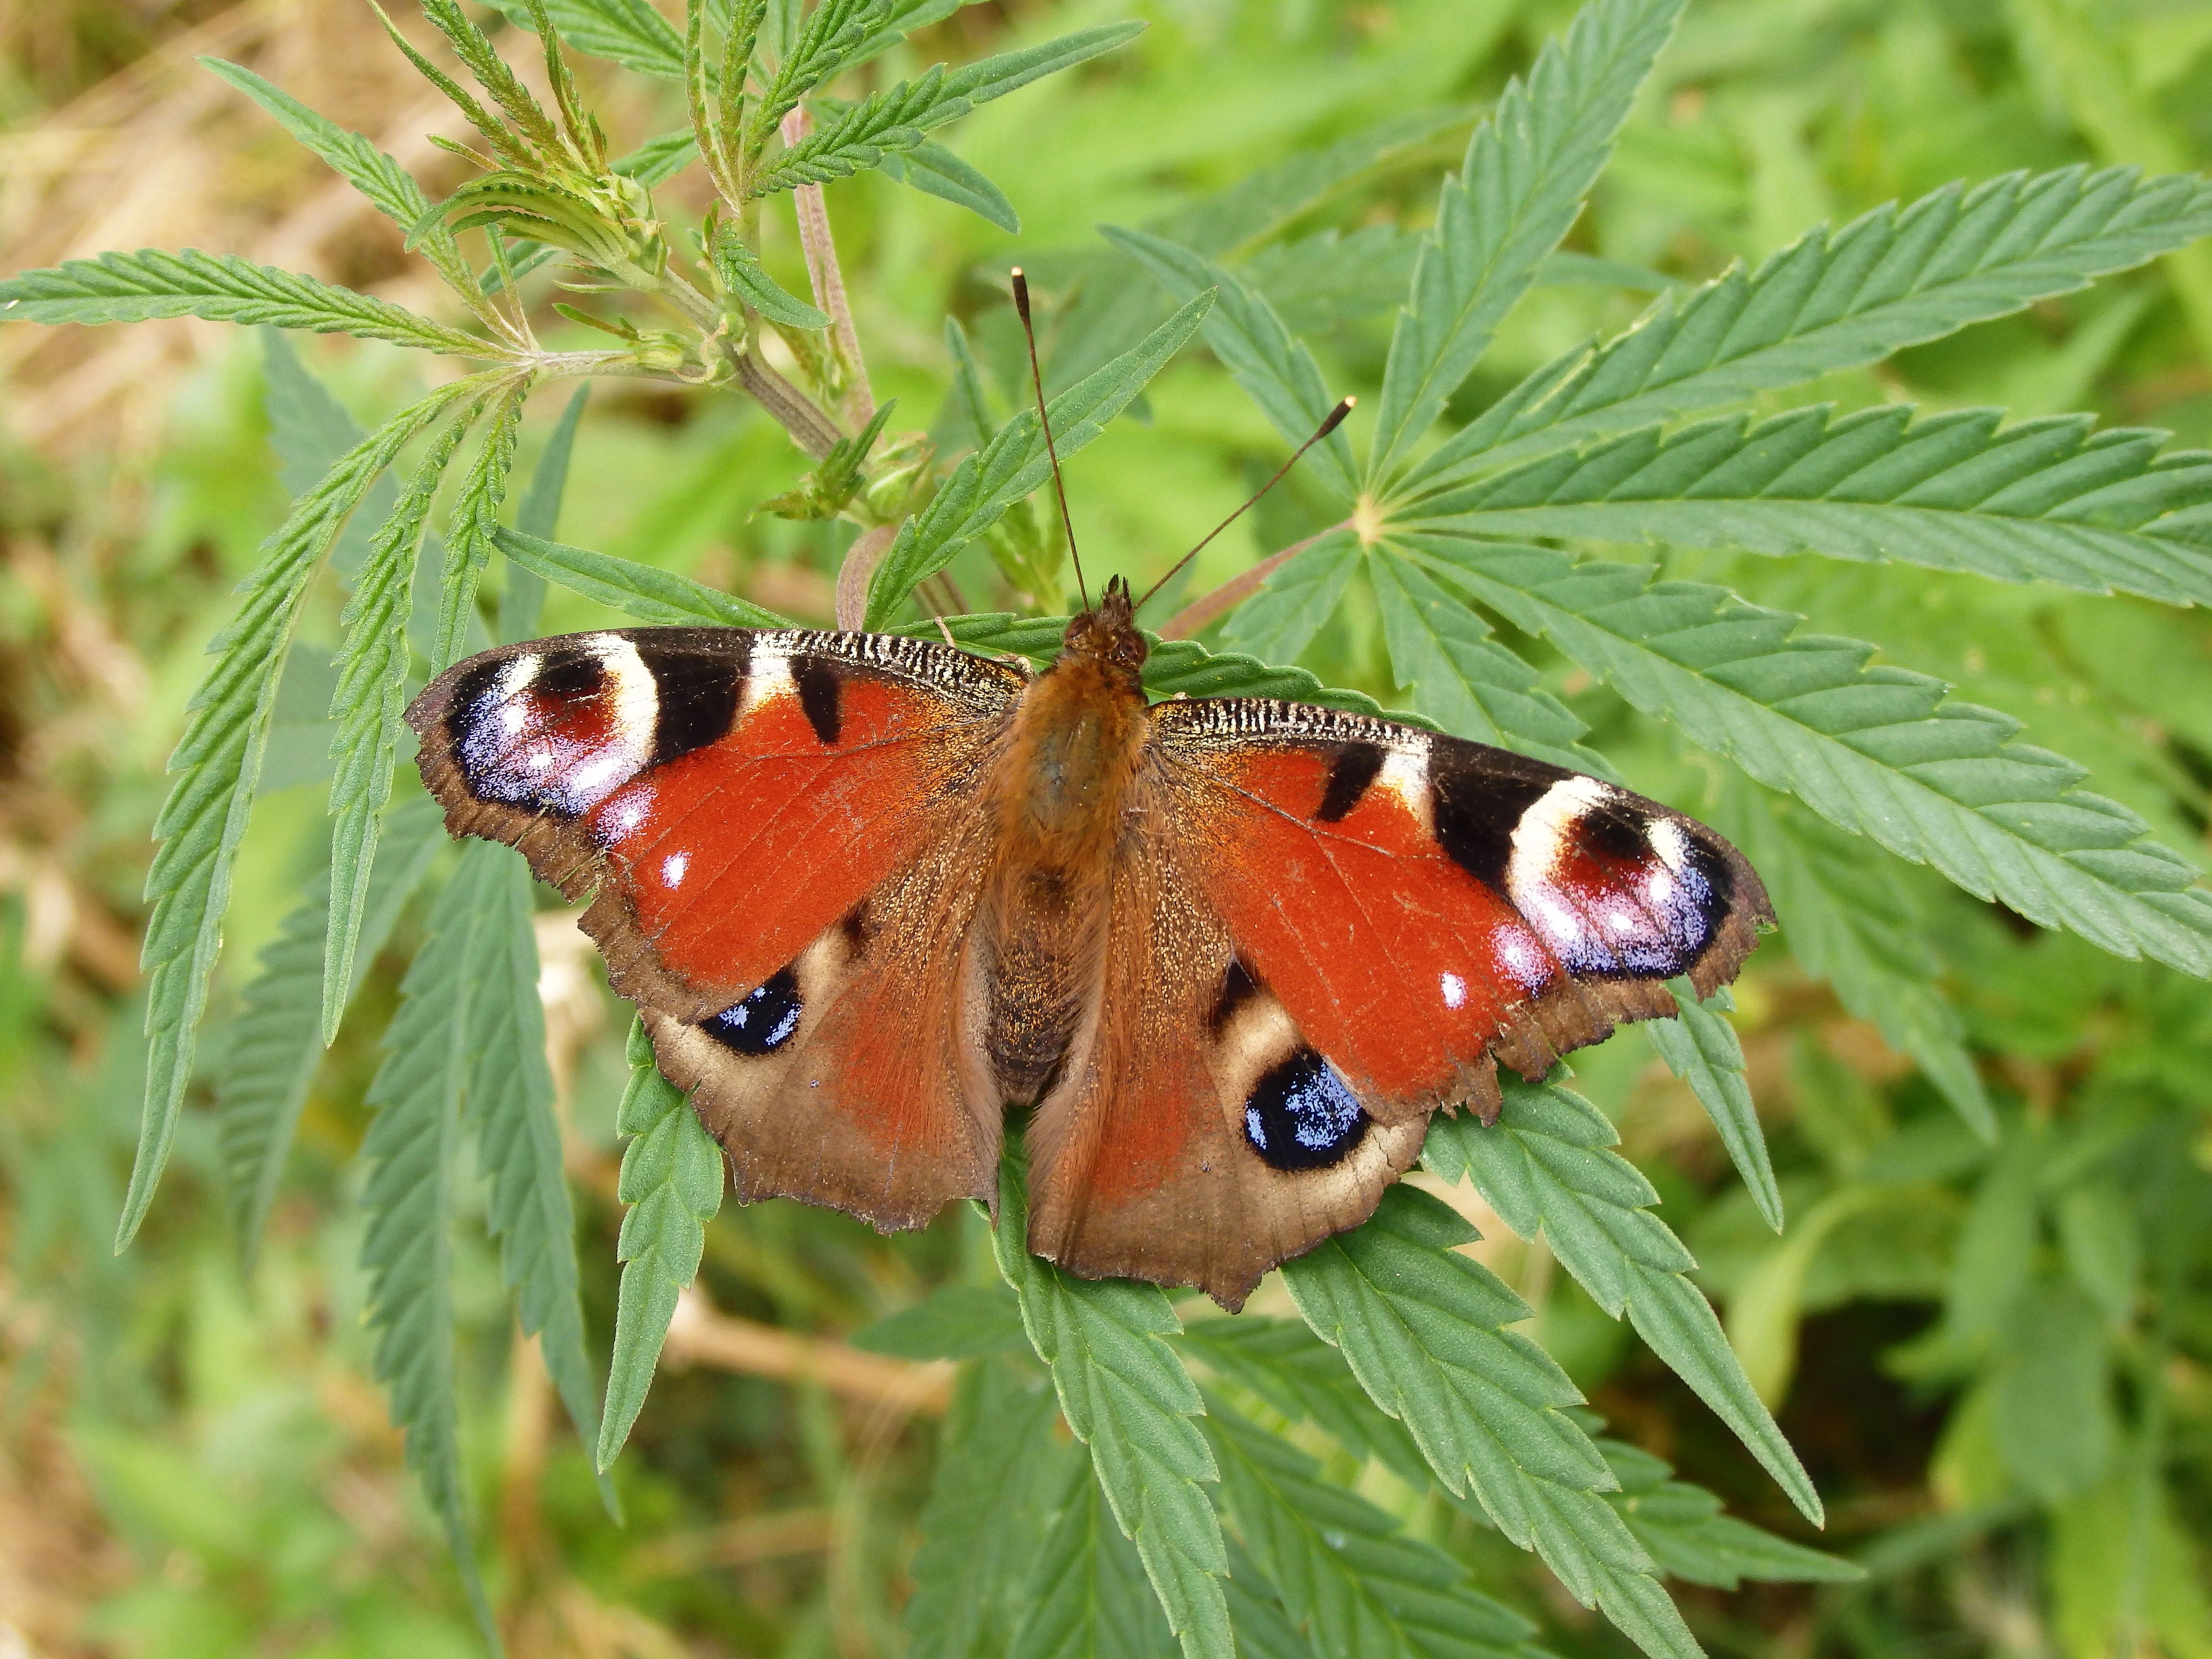 Peacock butterfly on green leaves